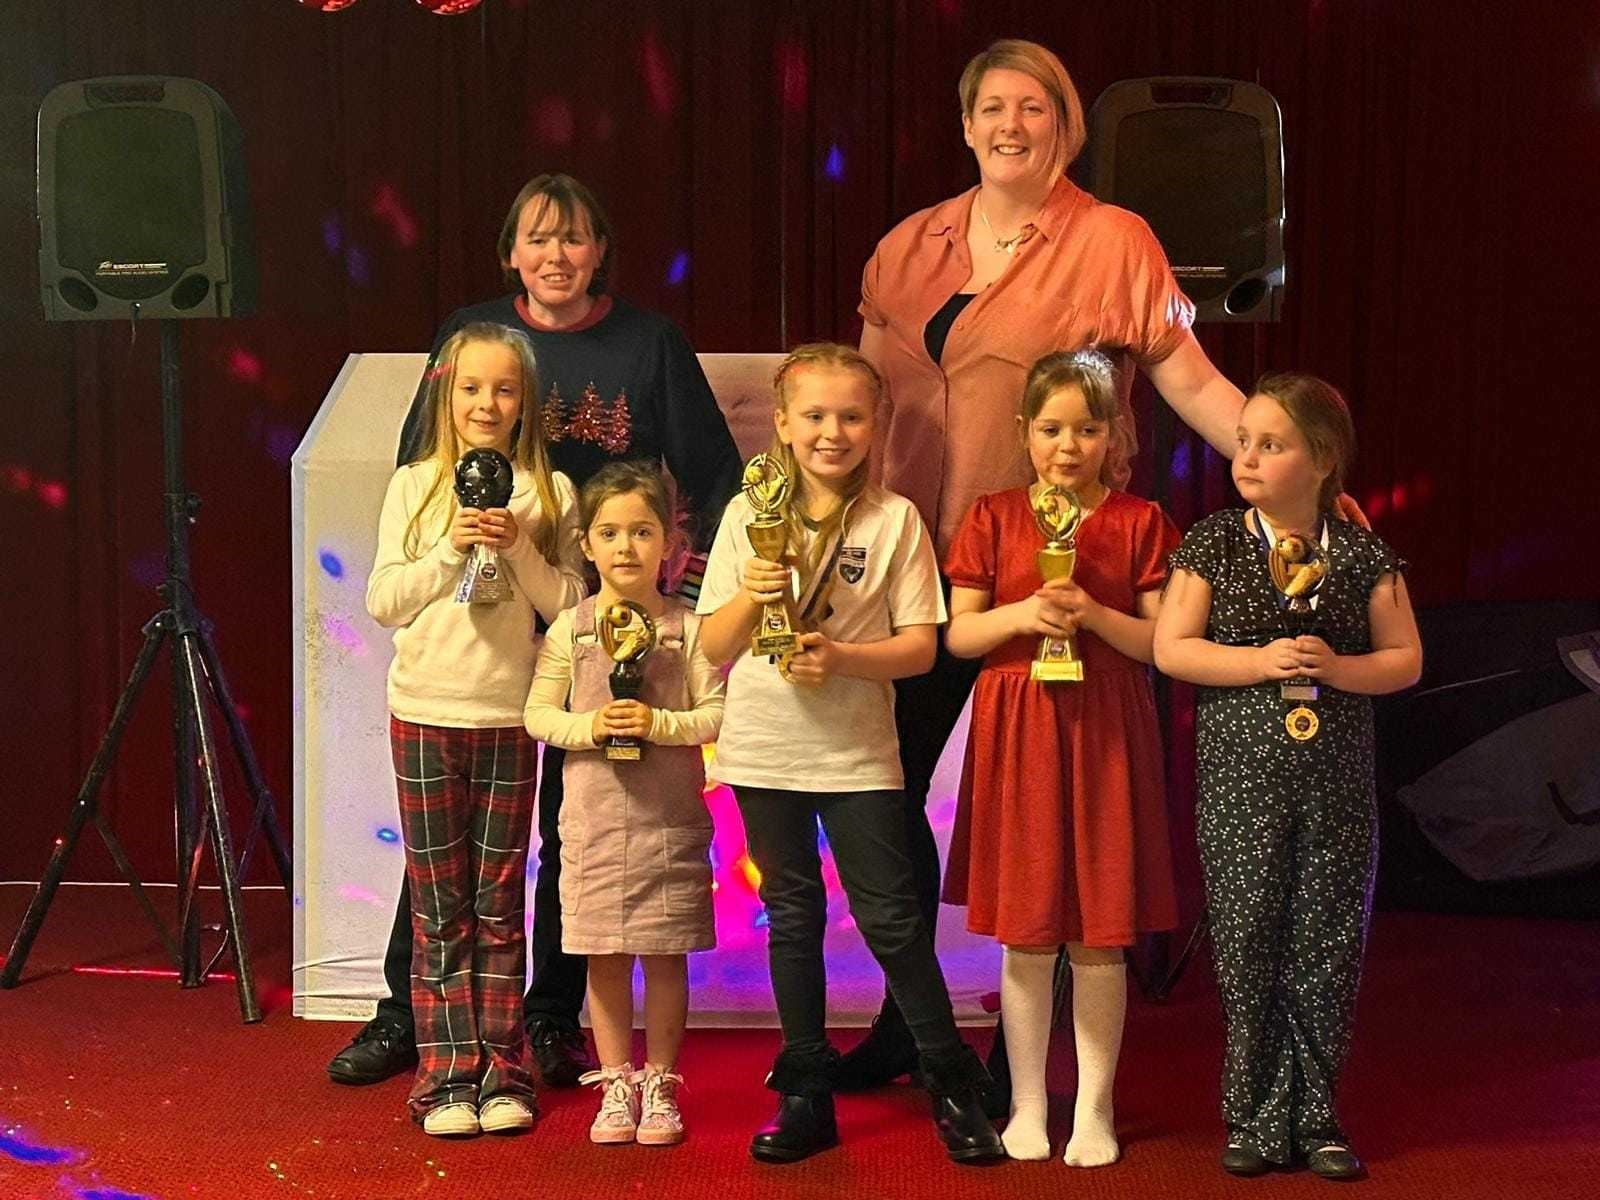 Ross County's under-8 girls award winners for 2023 - Ethos: Arloe Mackenzie & Cora Demaine. Most improved: Calaidh Maciver & Emily Barr. Player of the year: Anya Fleming (Not pictured) & Brodie Taylor.